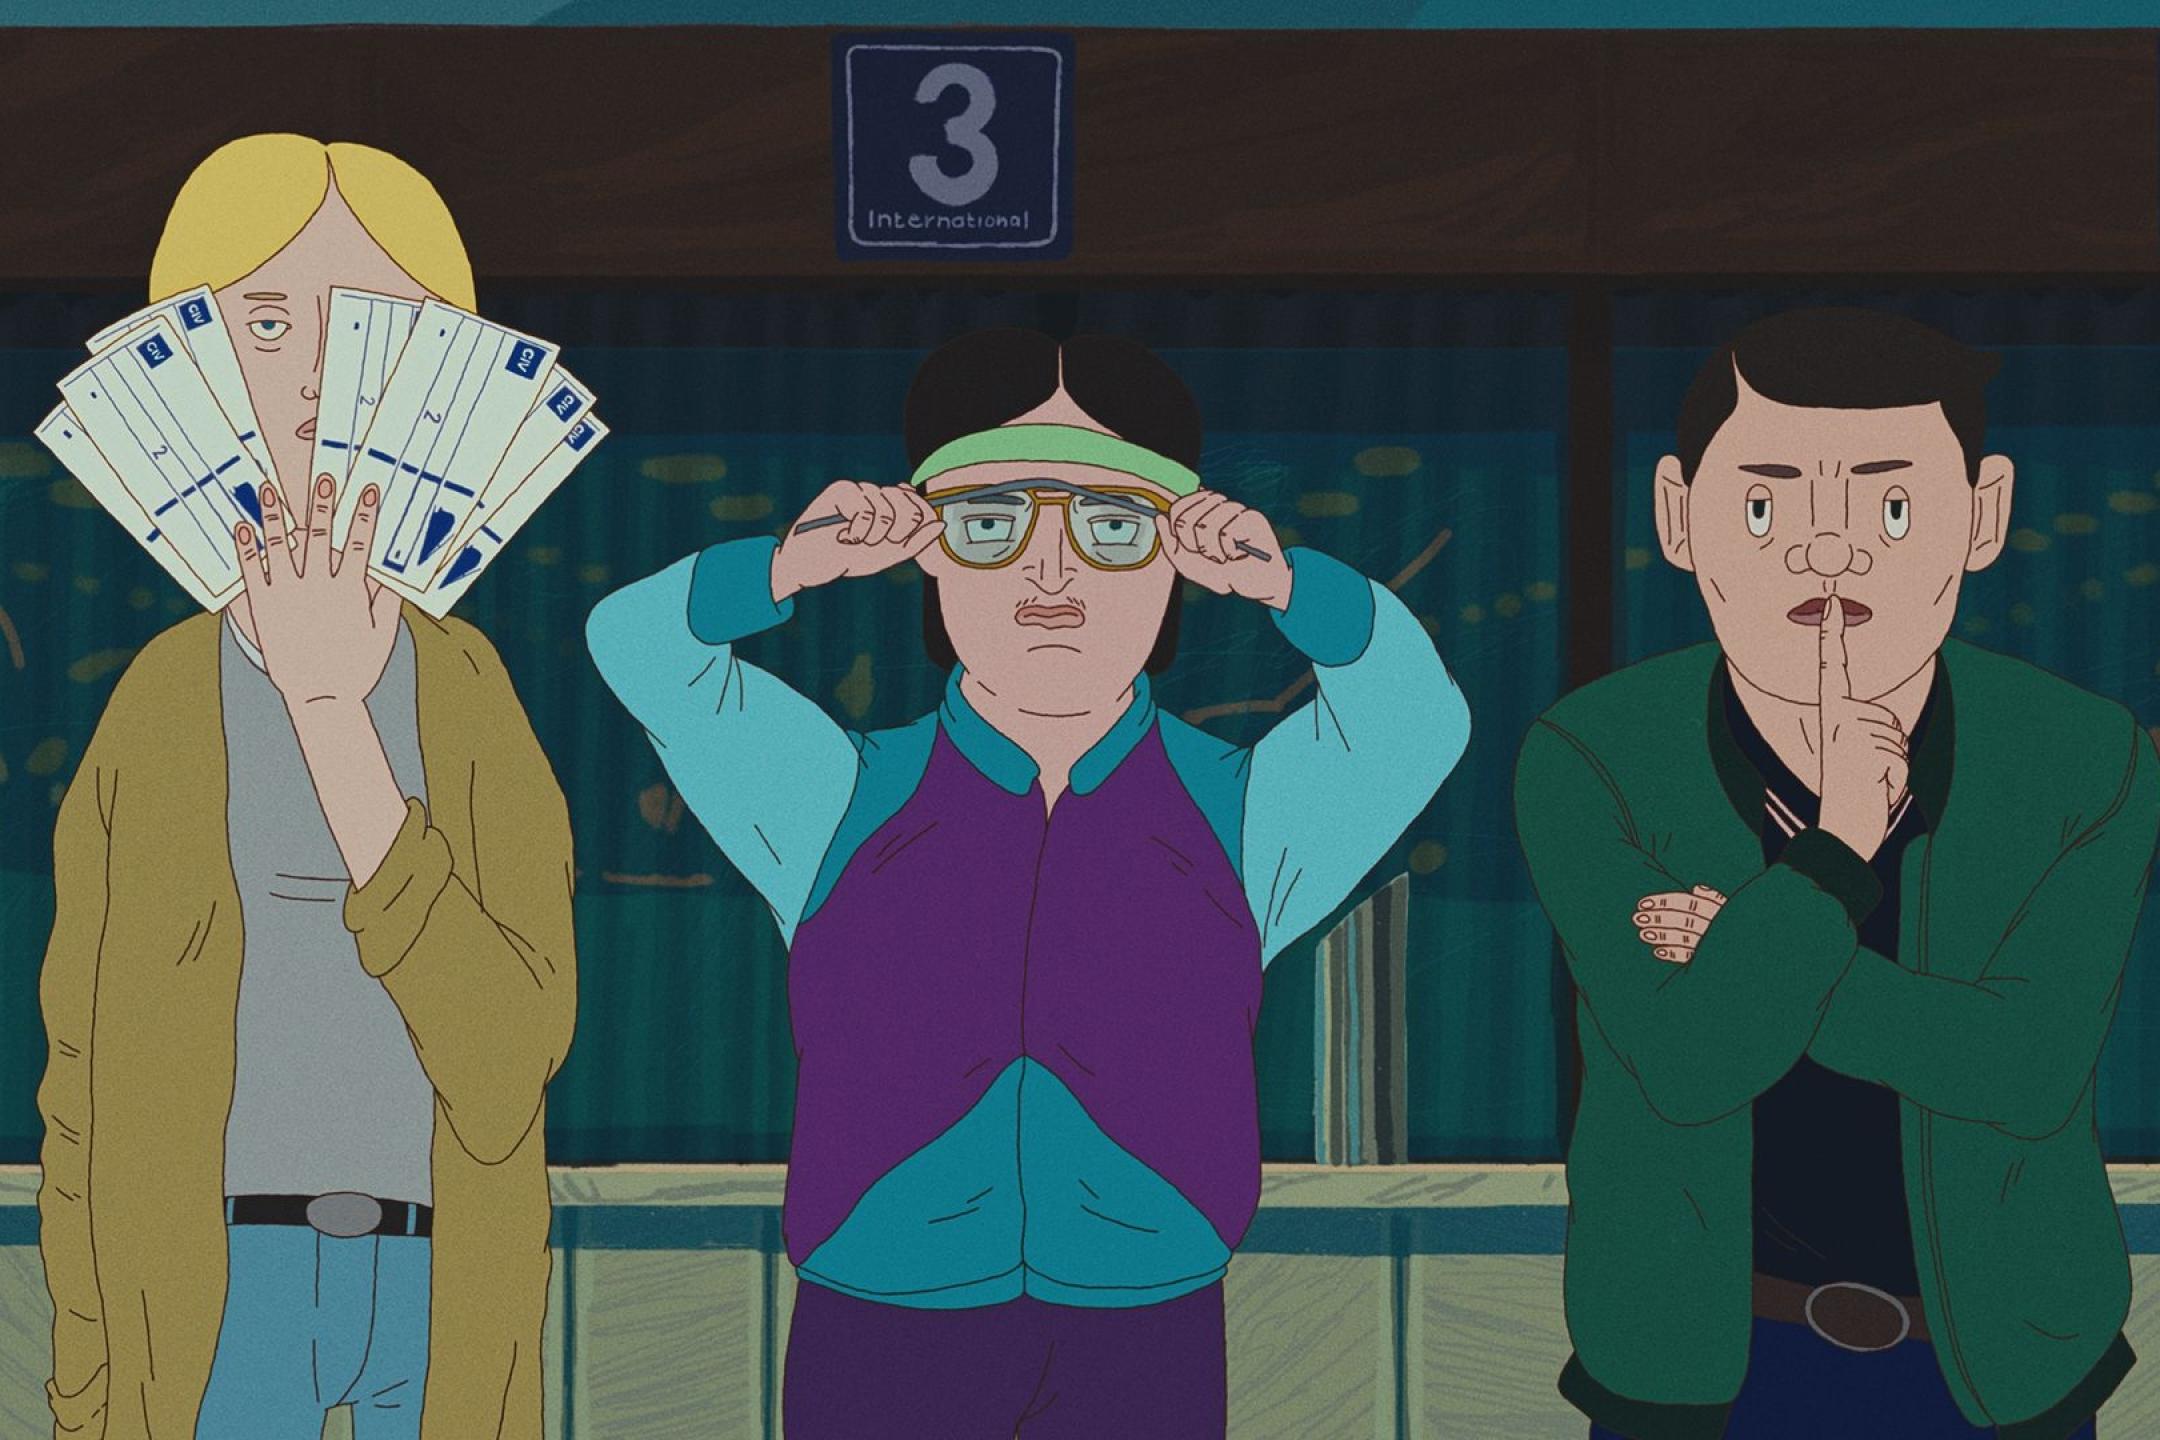 Three illustrated guys are standing at a train station. One is holding a bunch of tickets in front of his face, one adjusts his glasses and the third looks unimpressed with crossed arms